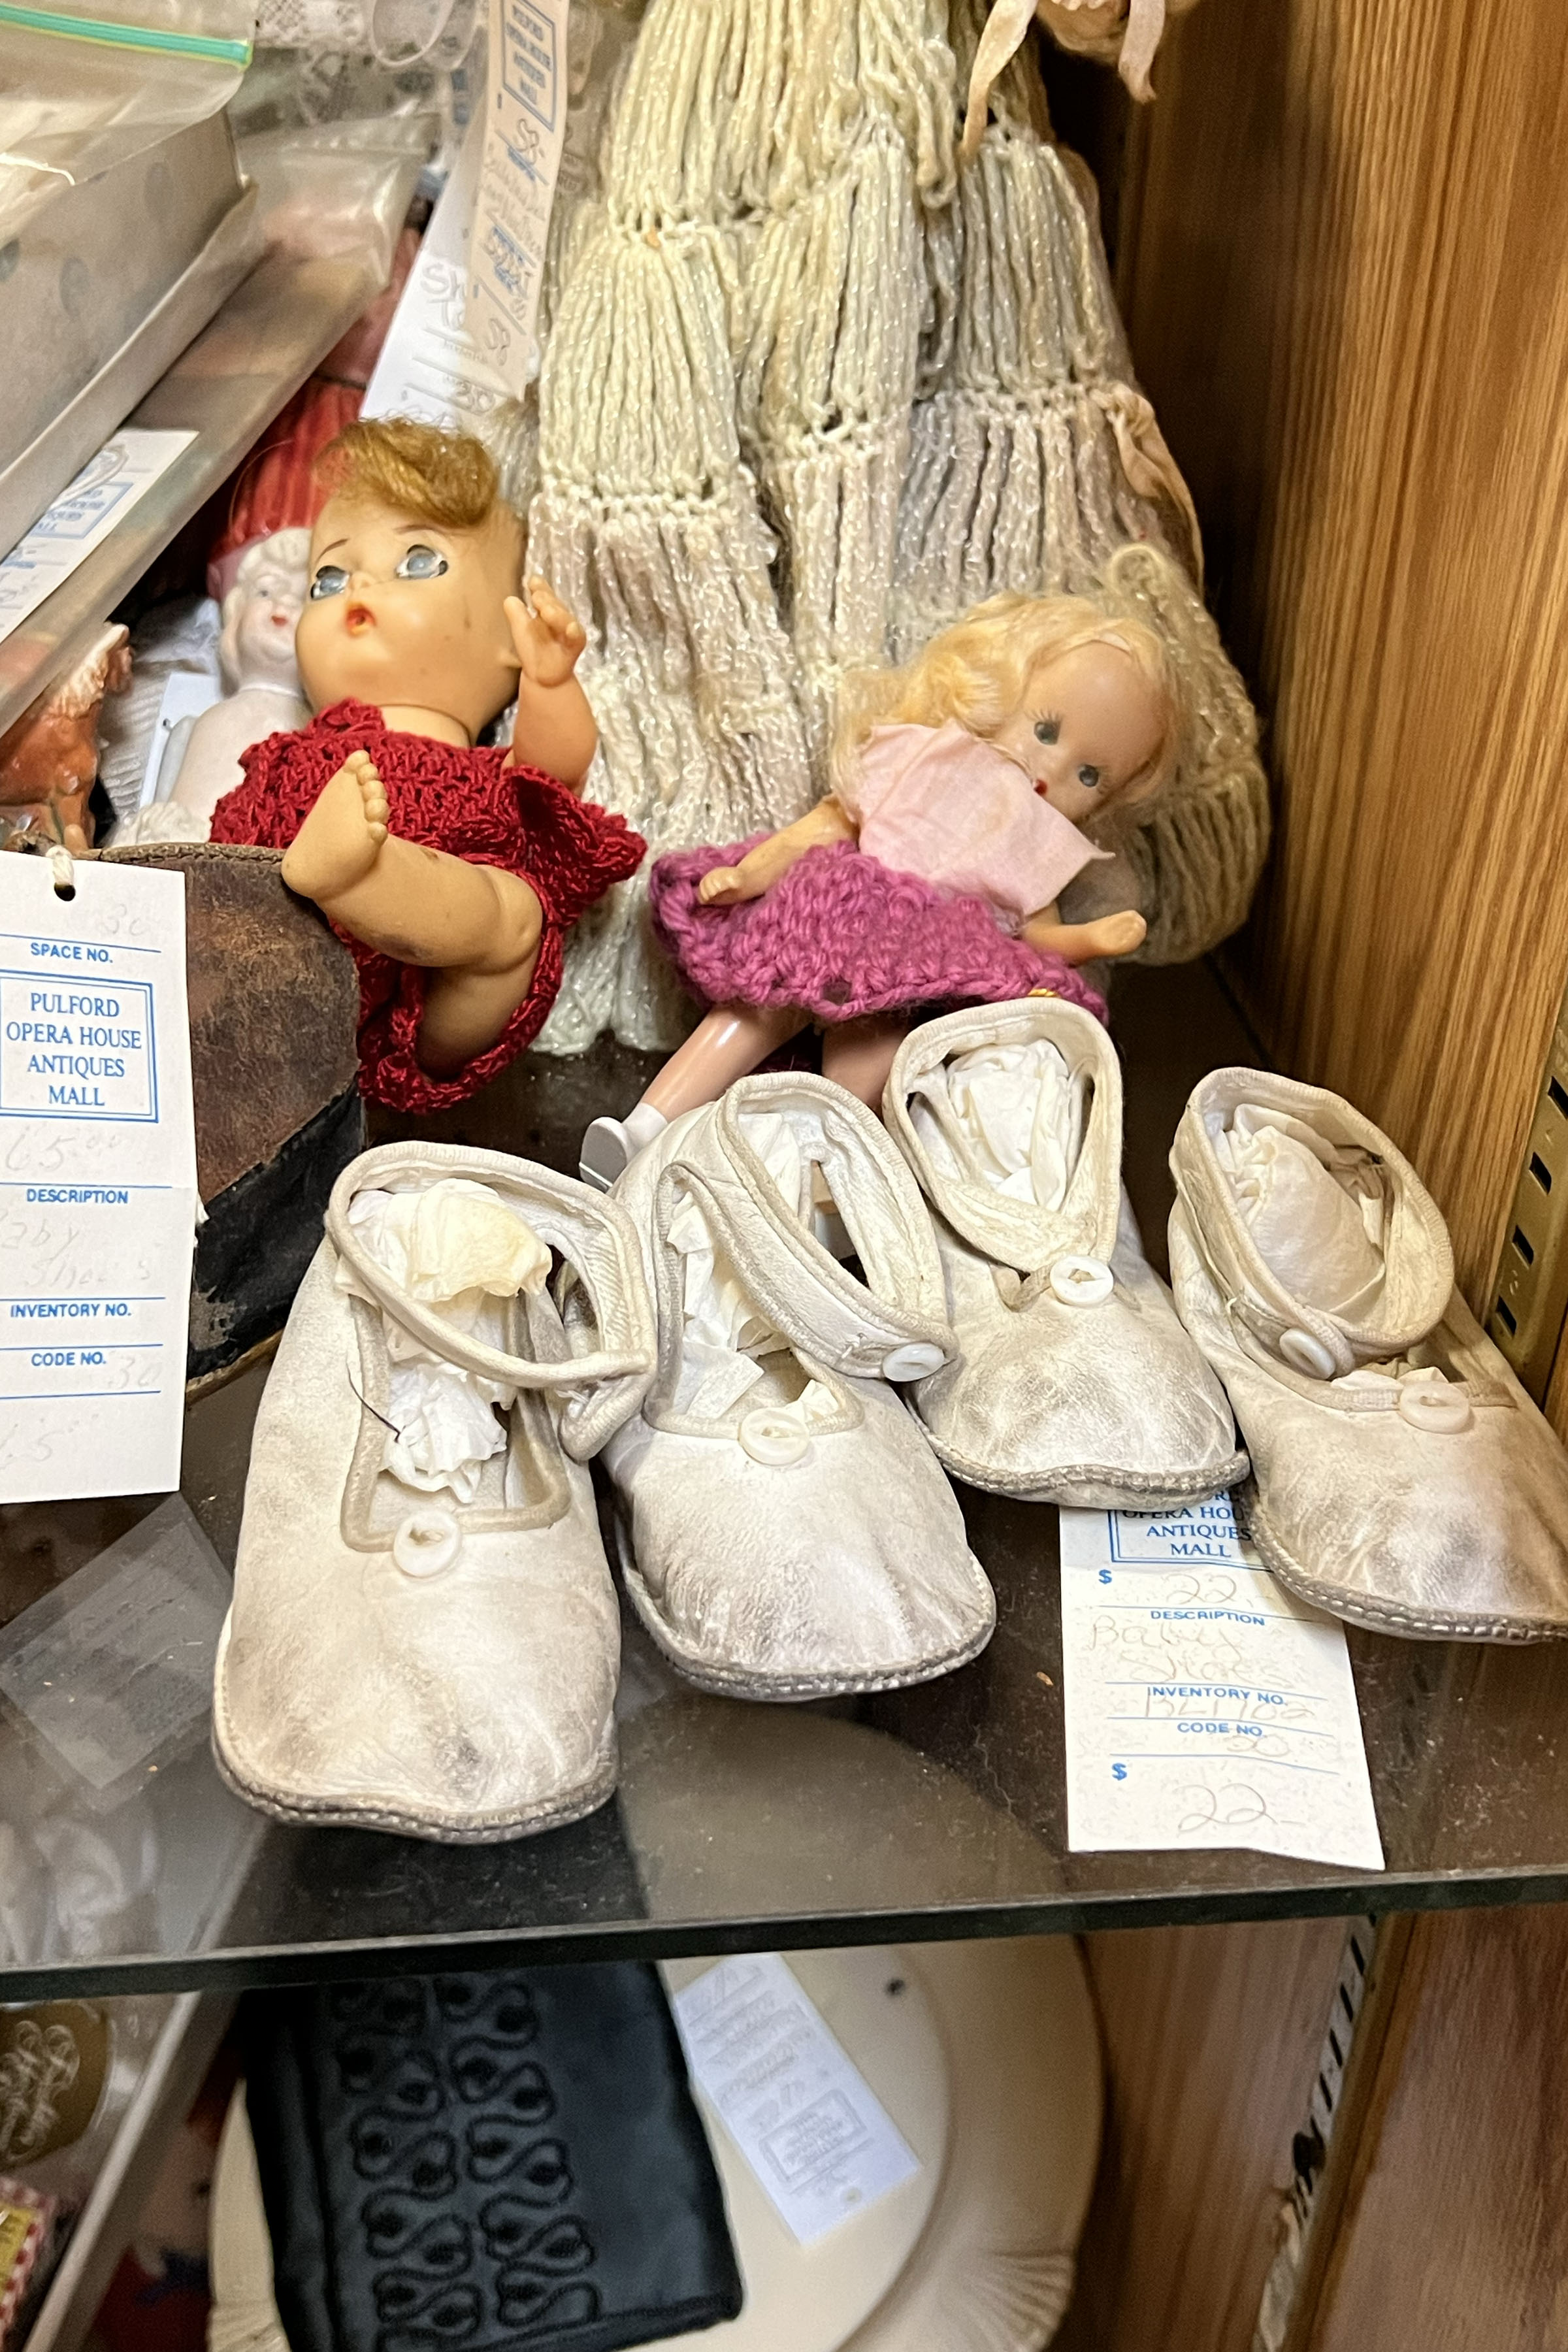 Frank is also selling baby shoes for $22